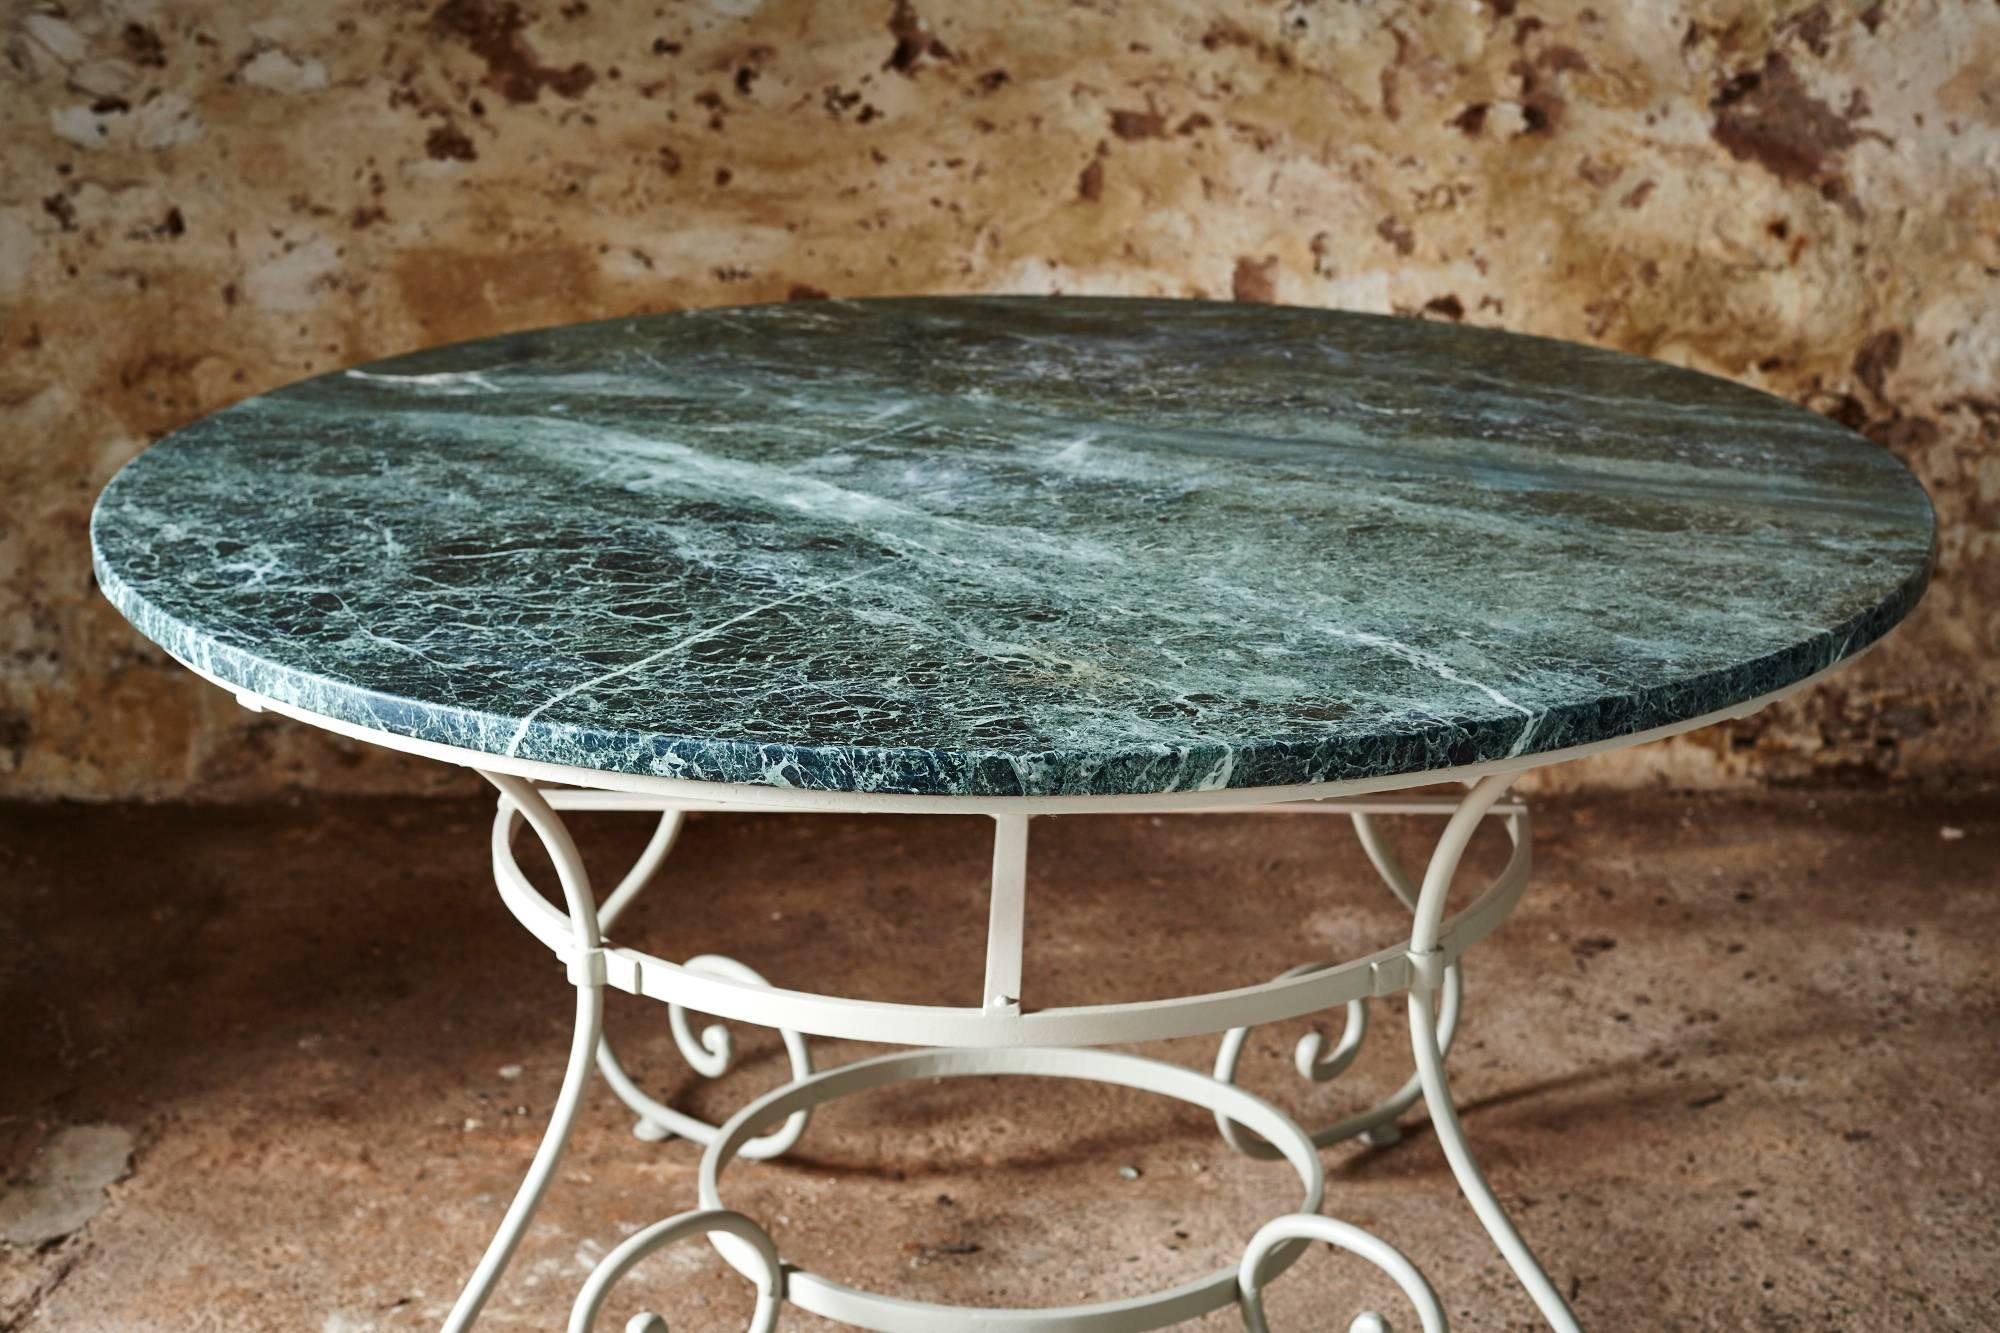 
A round, late 19th century Parisian table with a remarkable green marble top
This lovely table would have been hand-forged on a riveted wrought iron frame.
It would make a stunning display, garden or dining room table.
  
  